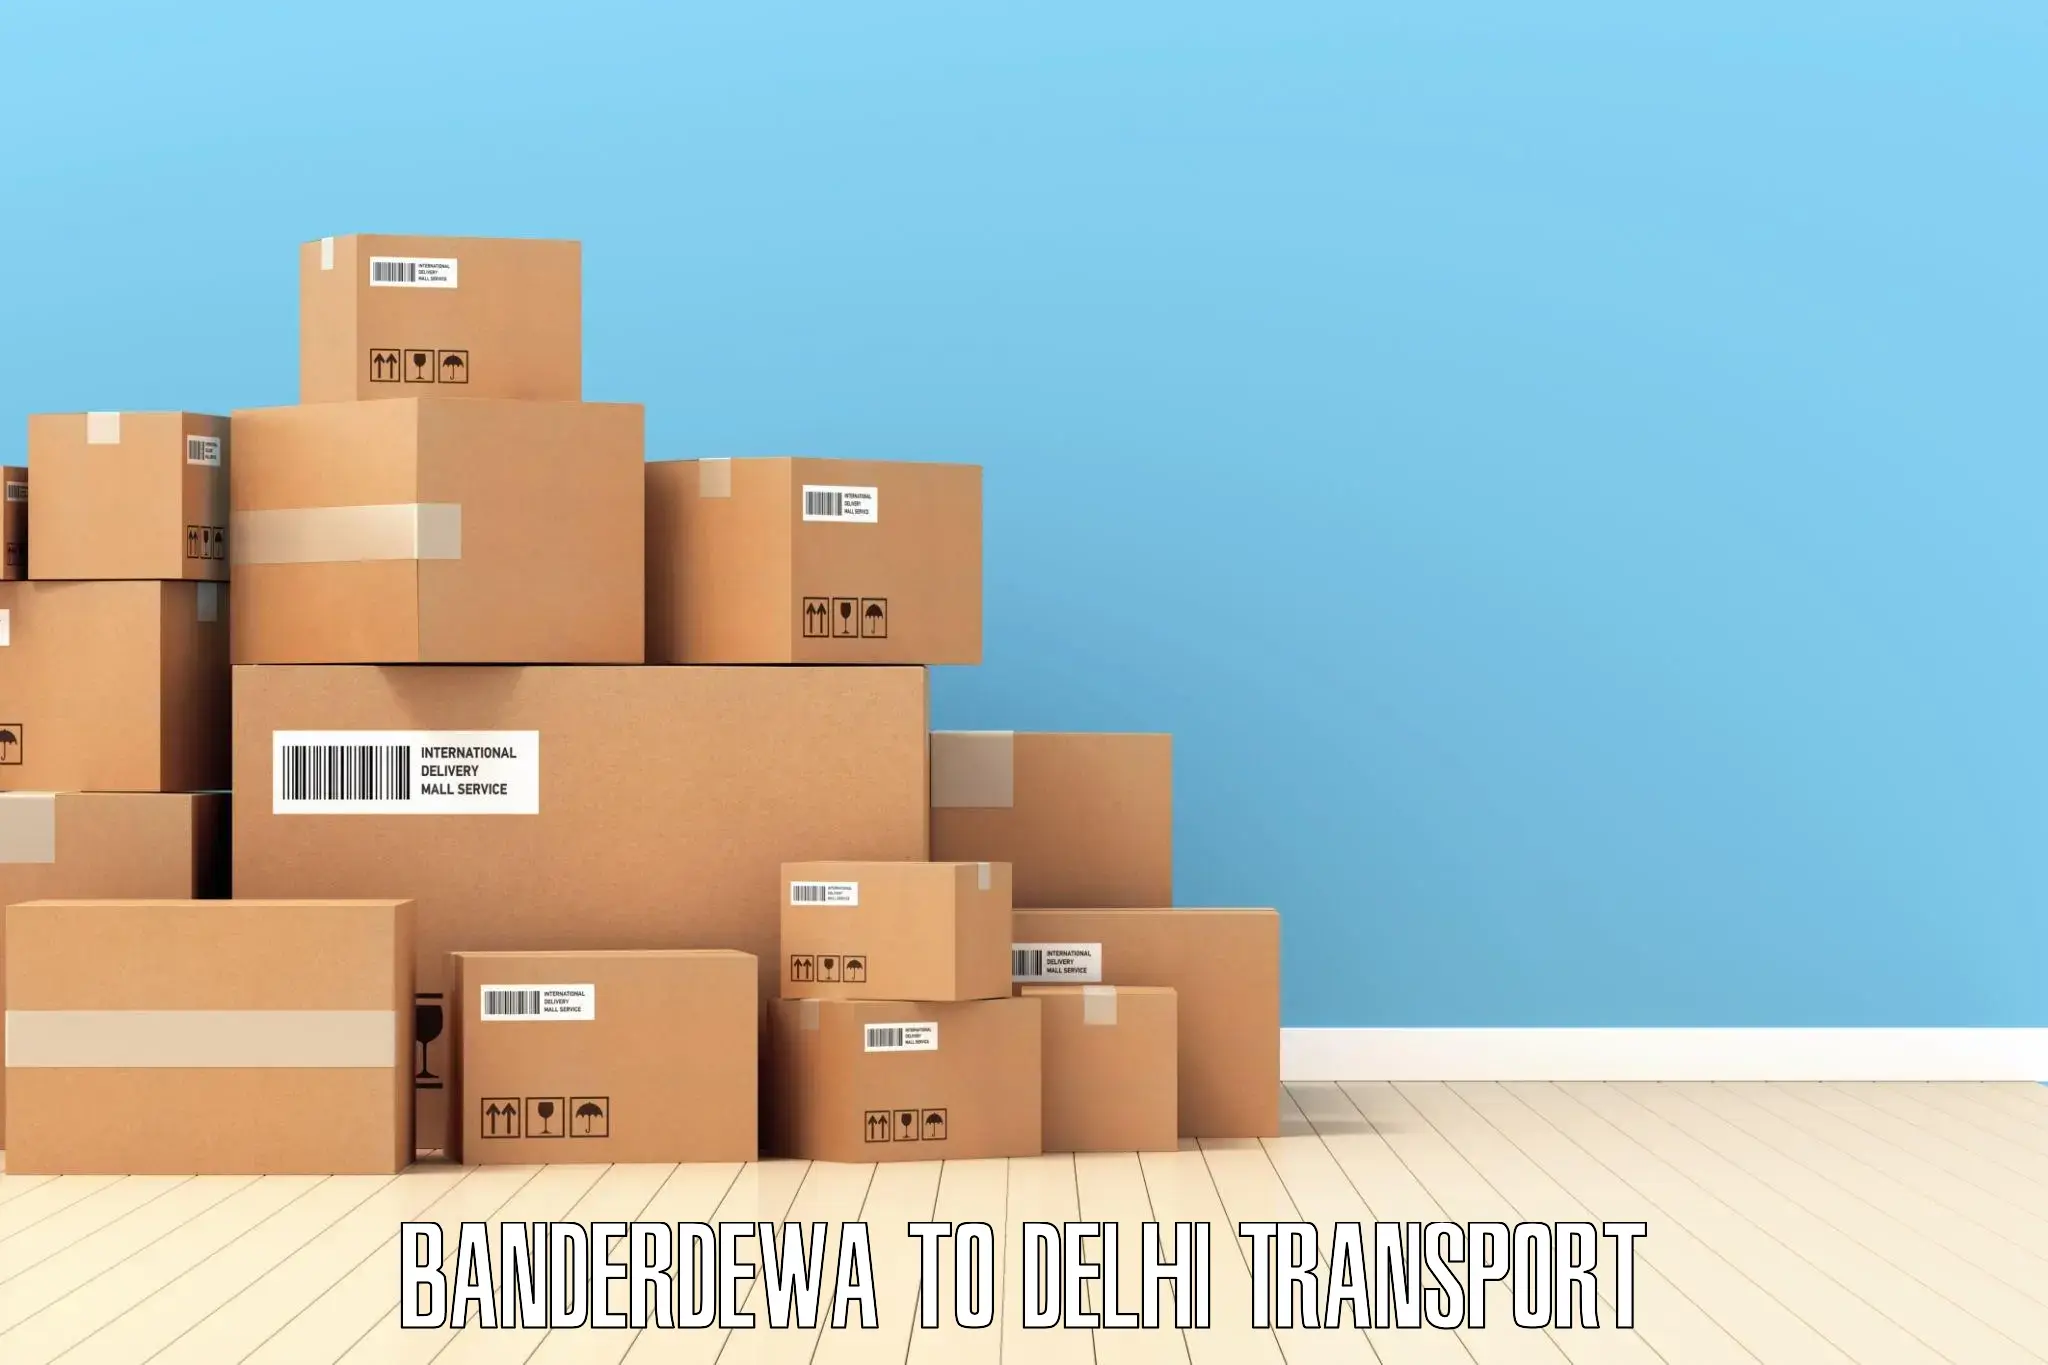 Daily transport service Banderdewa to Lodhi Road